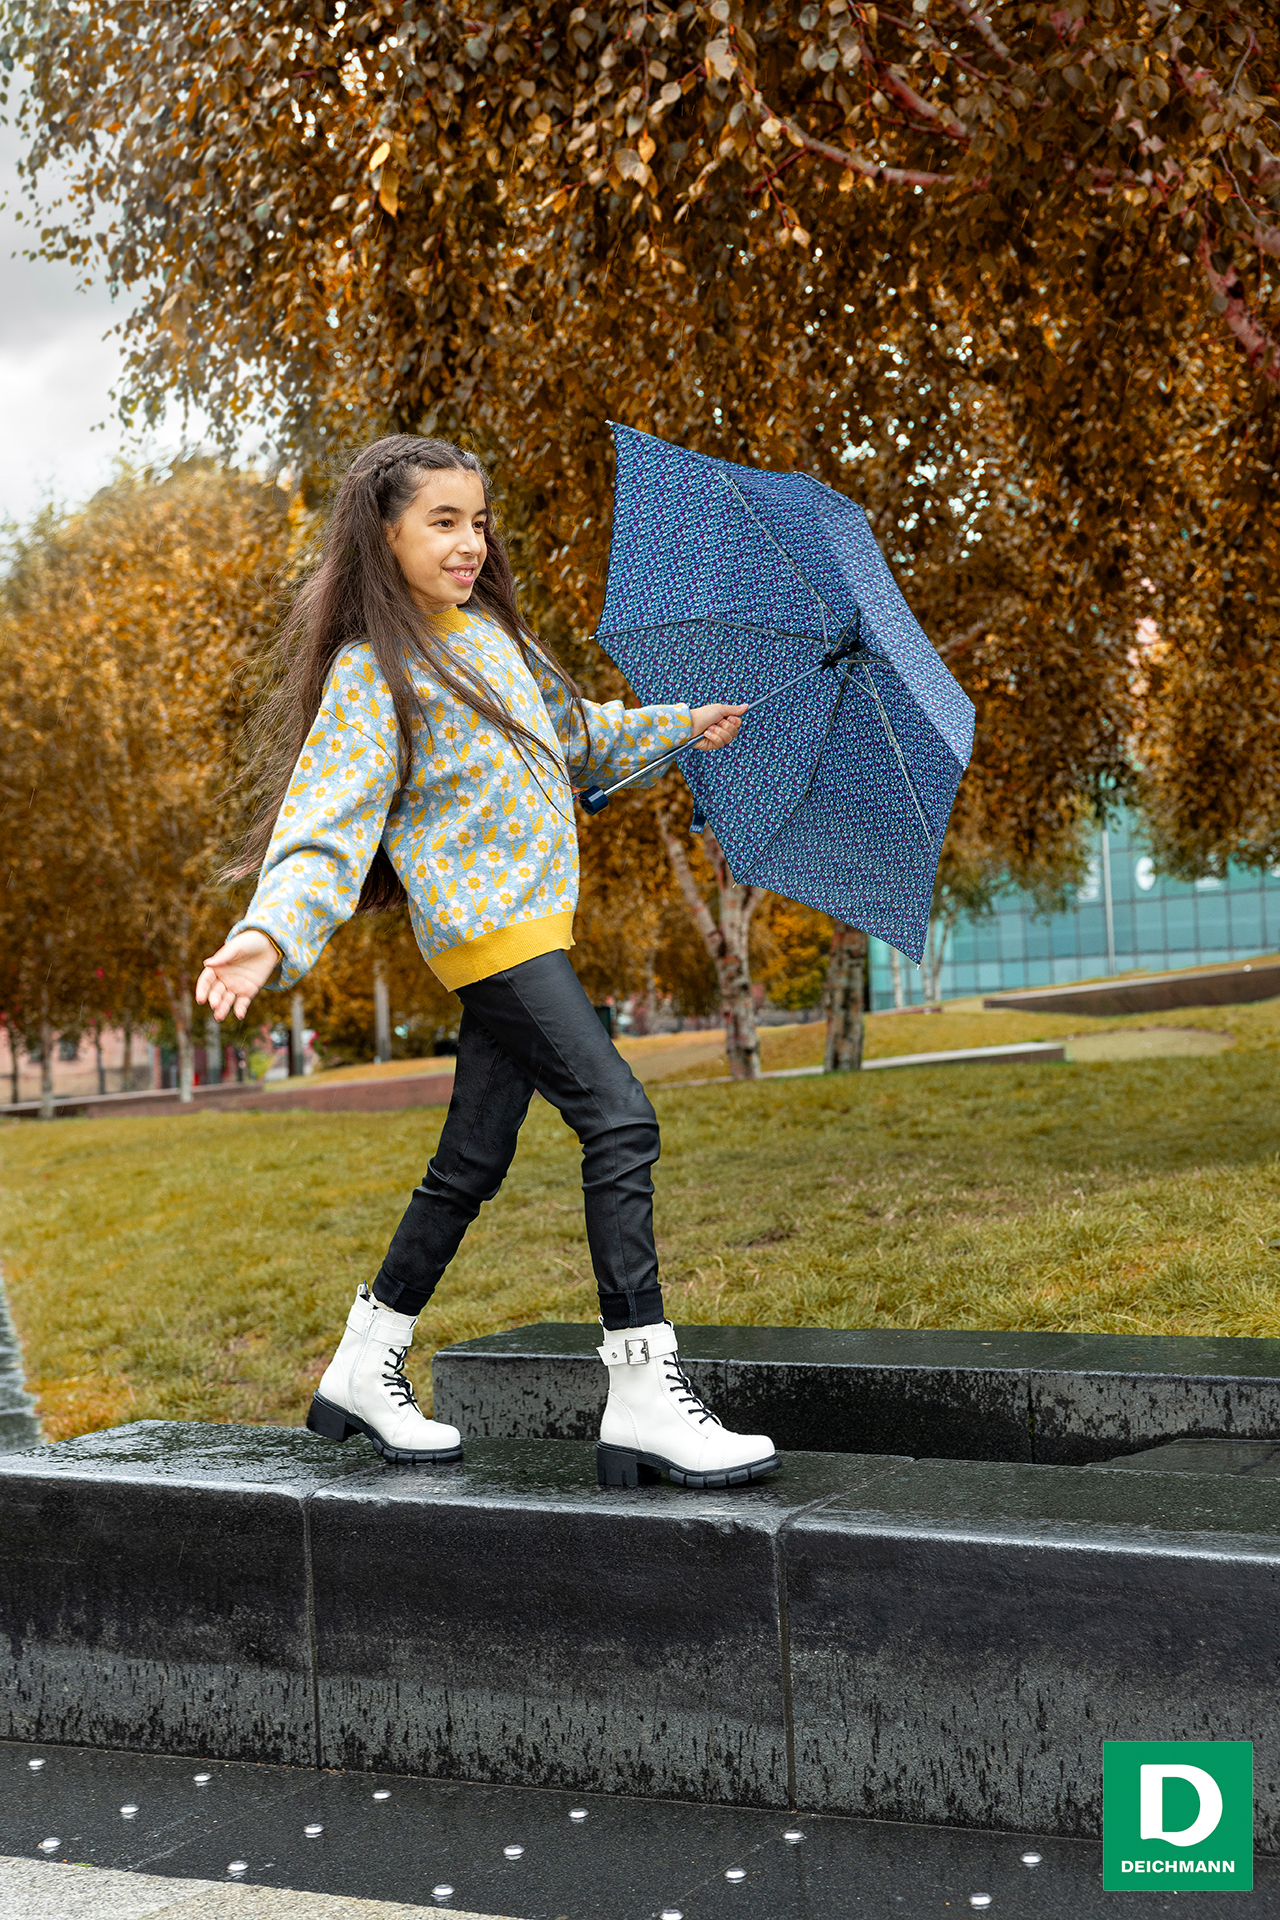 childrens-footwear-fashion-photography-manchester-for-social-content-and-advertising-campaign